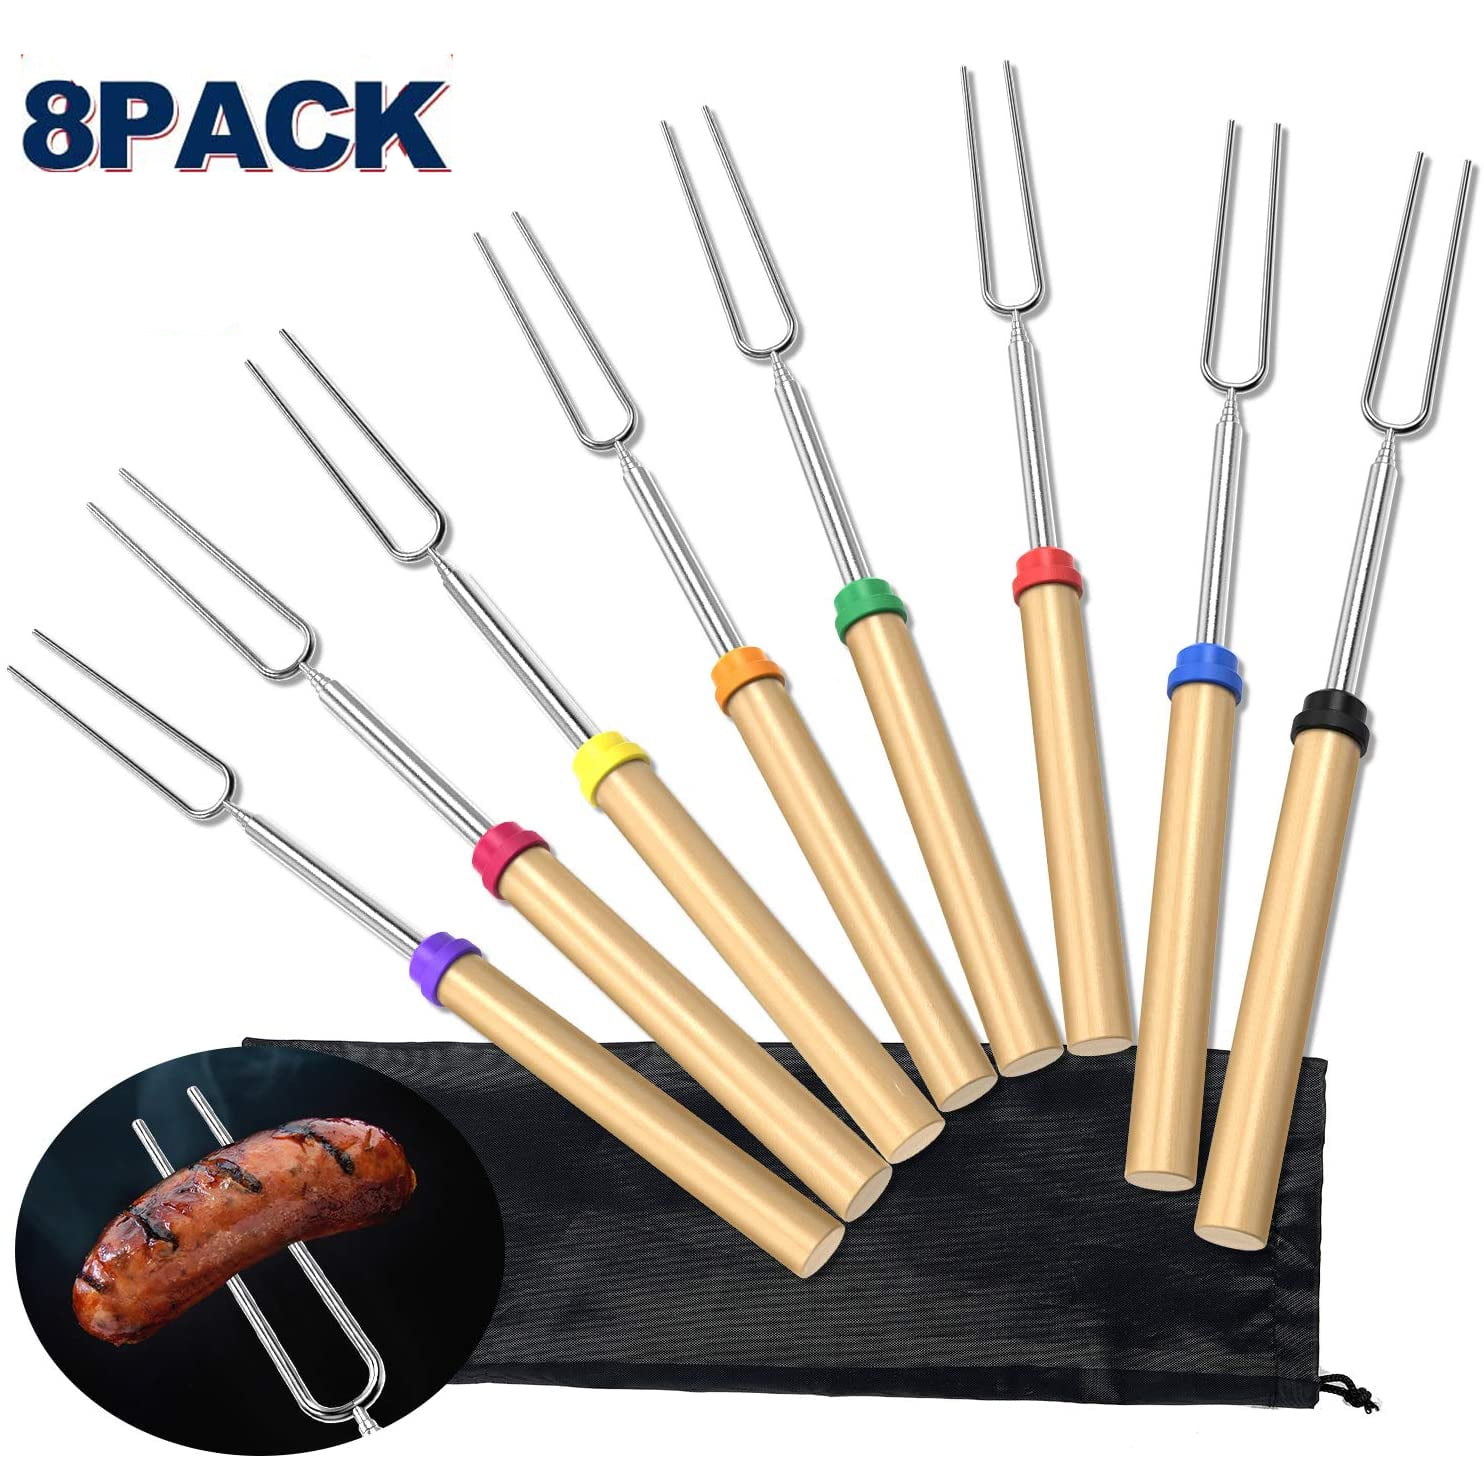 New! Marshmallow Roasting Sticks Grilling Extension Forks Room Essentials 